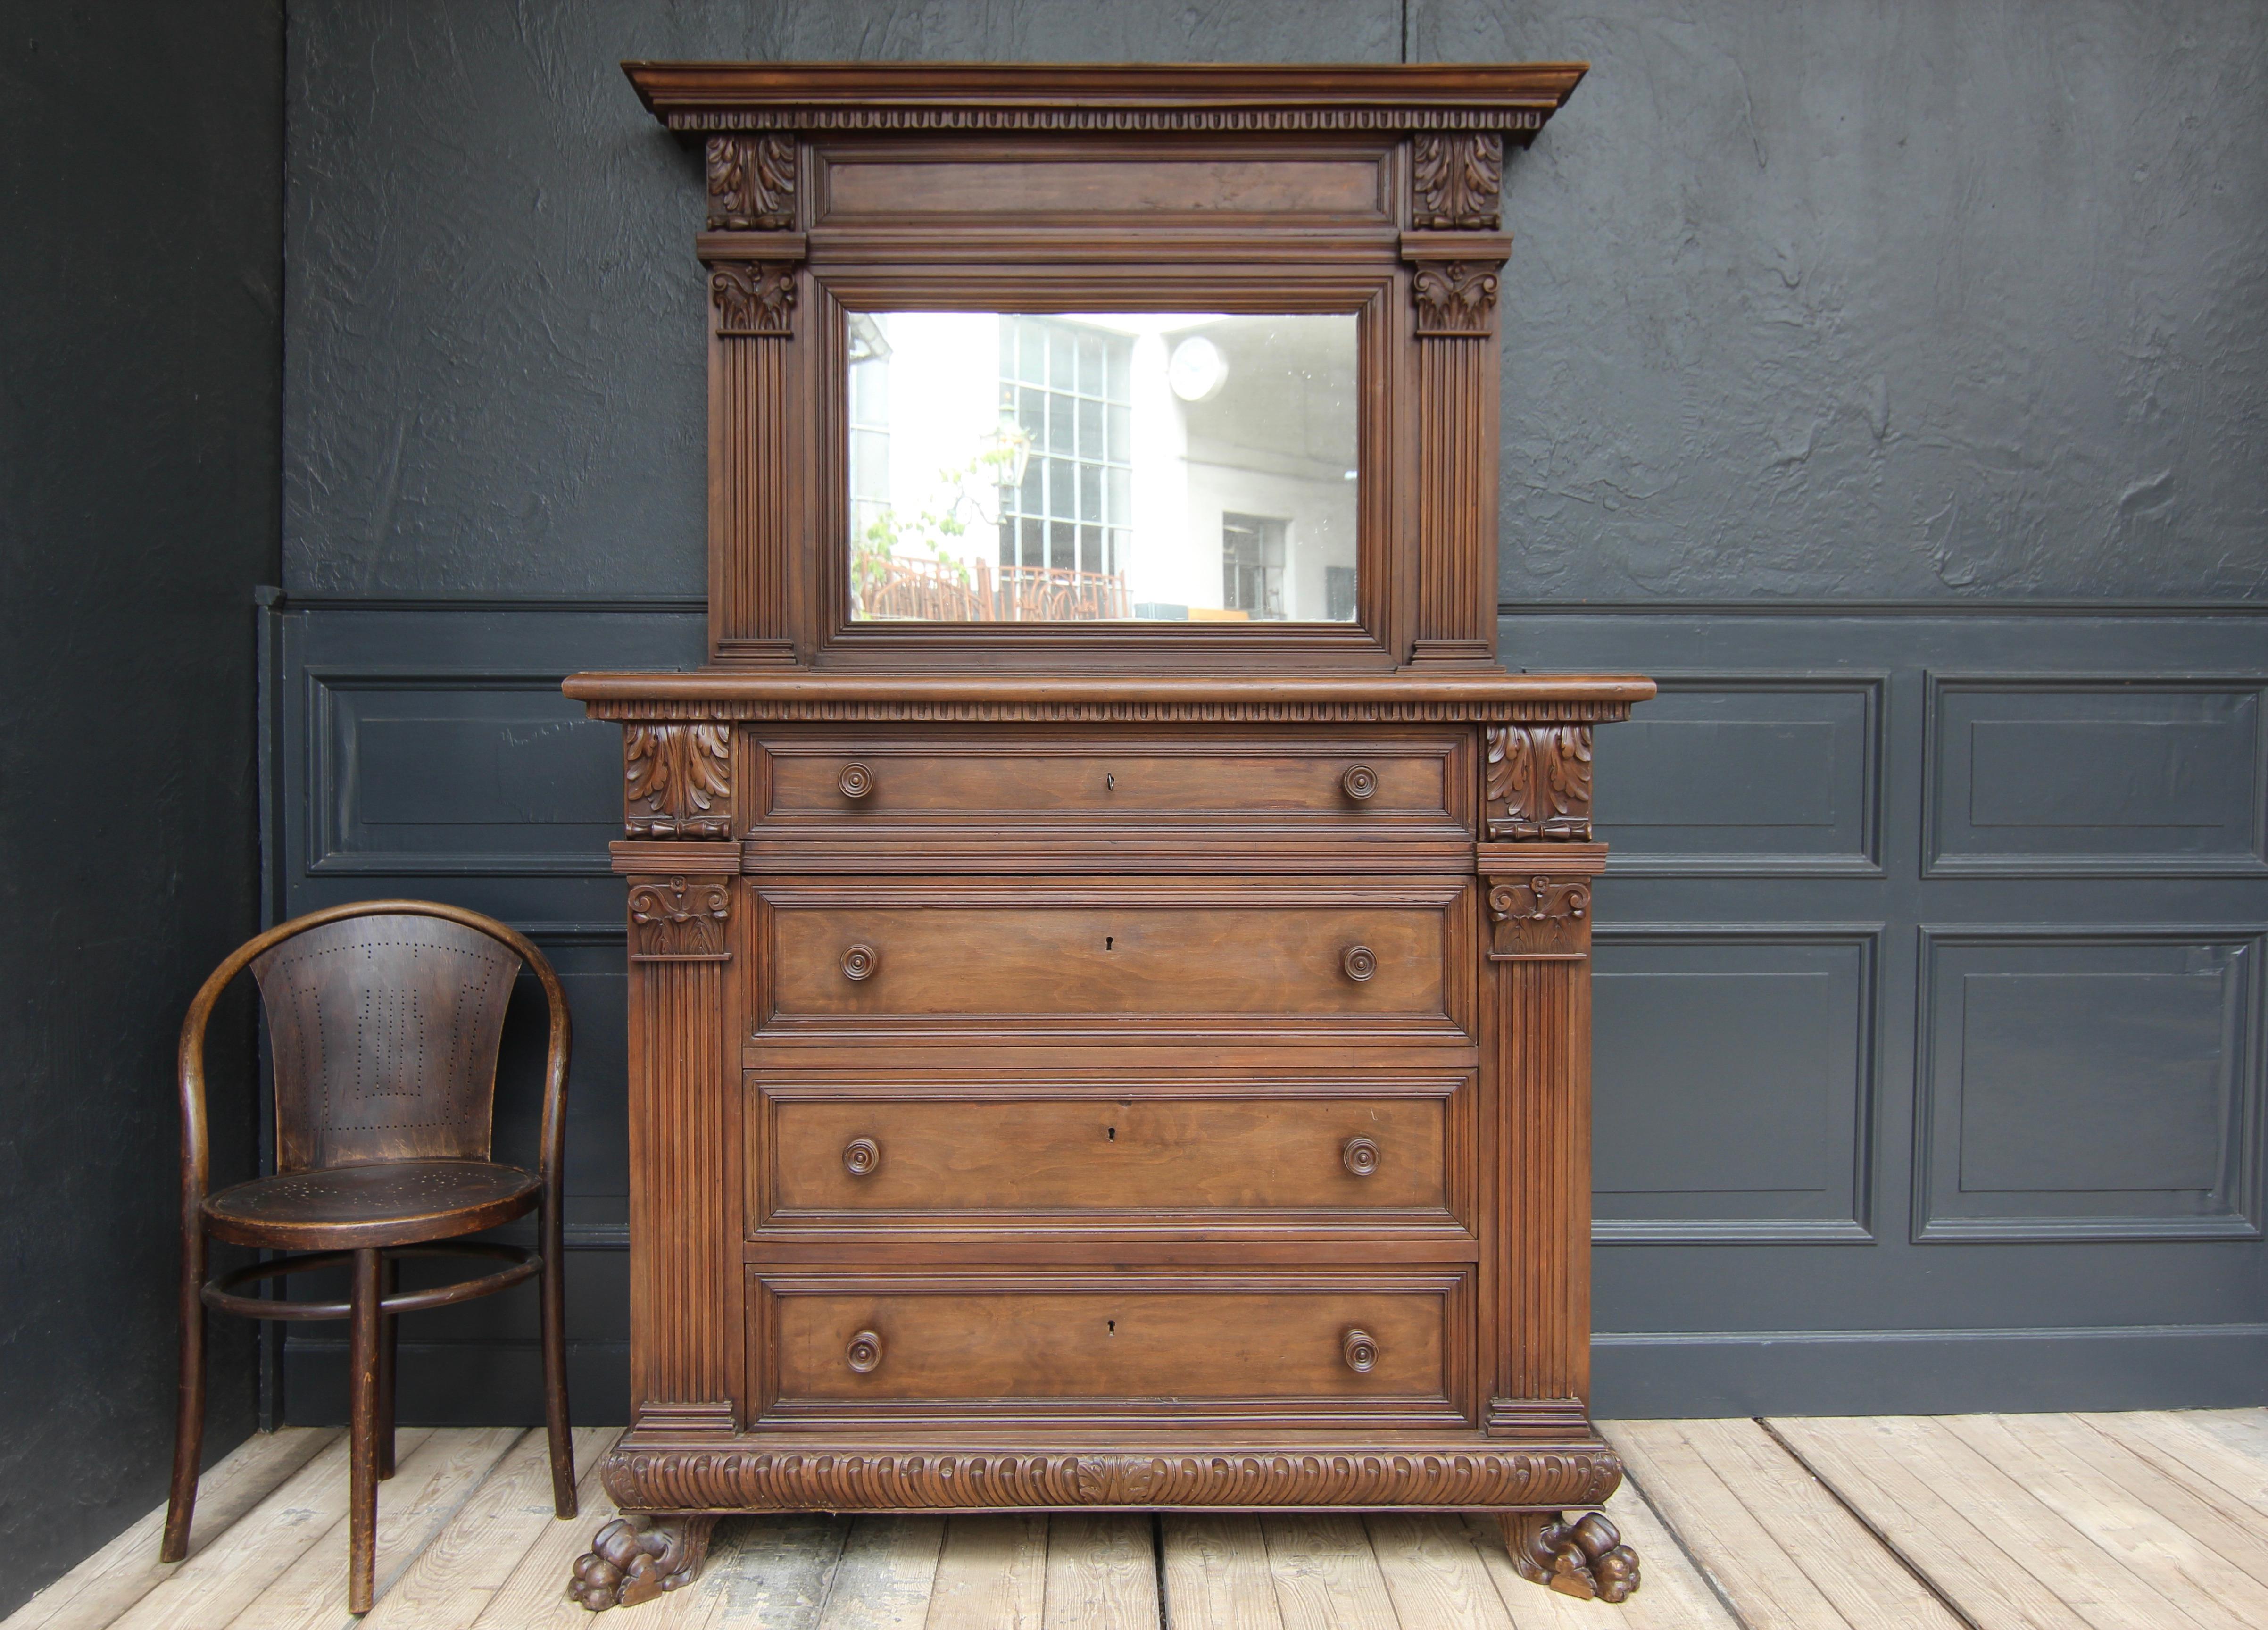 Large Italian Renaissance-Revival chest of drawers with mirror top. Tuscany, early 20th century. Solid walnut as well as veneered on pine.

Side coffered chest of drawers with 4 large drawers under a slightly overhanging profiled top plate. Wide